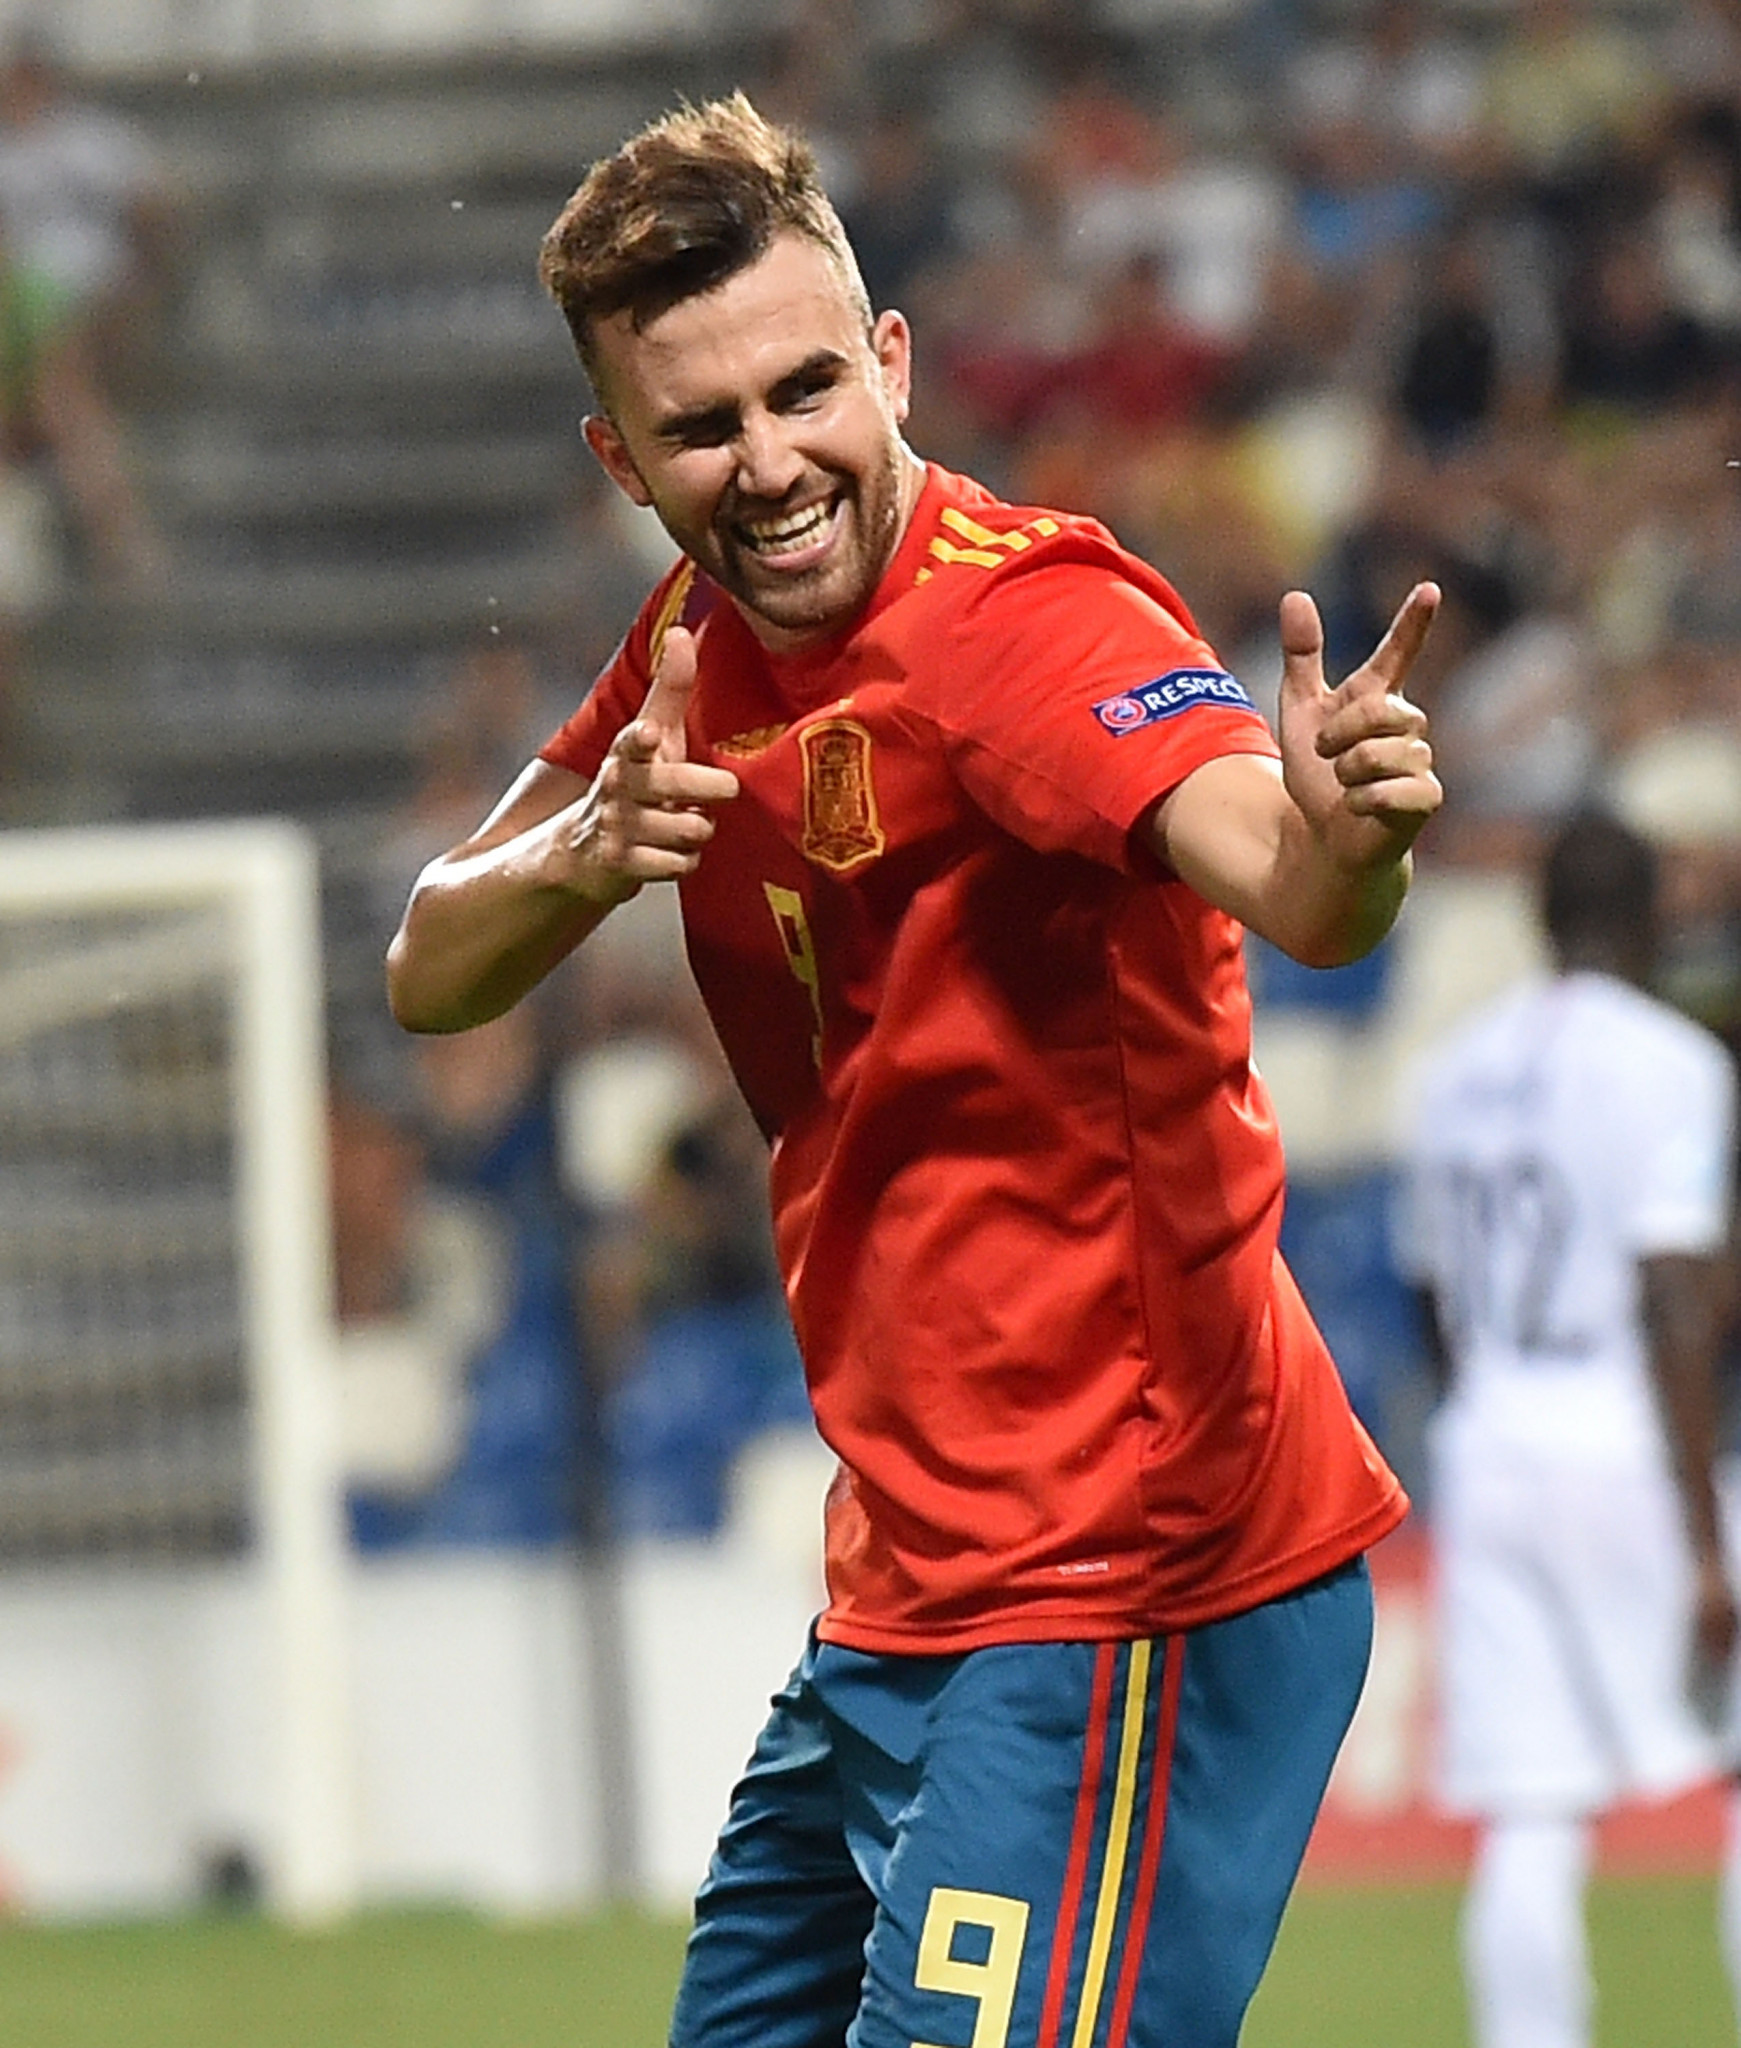 Borja Mayoral was among Spain's goalscorers as they beat France 4-1 in today's second semi-final ©Getty Images